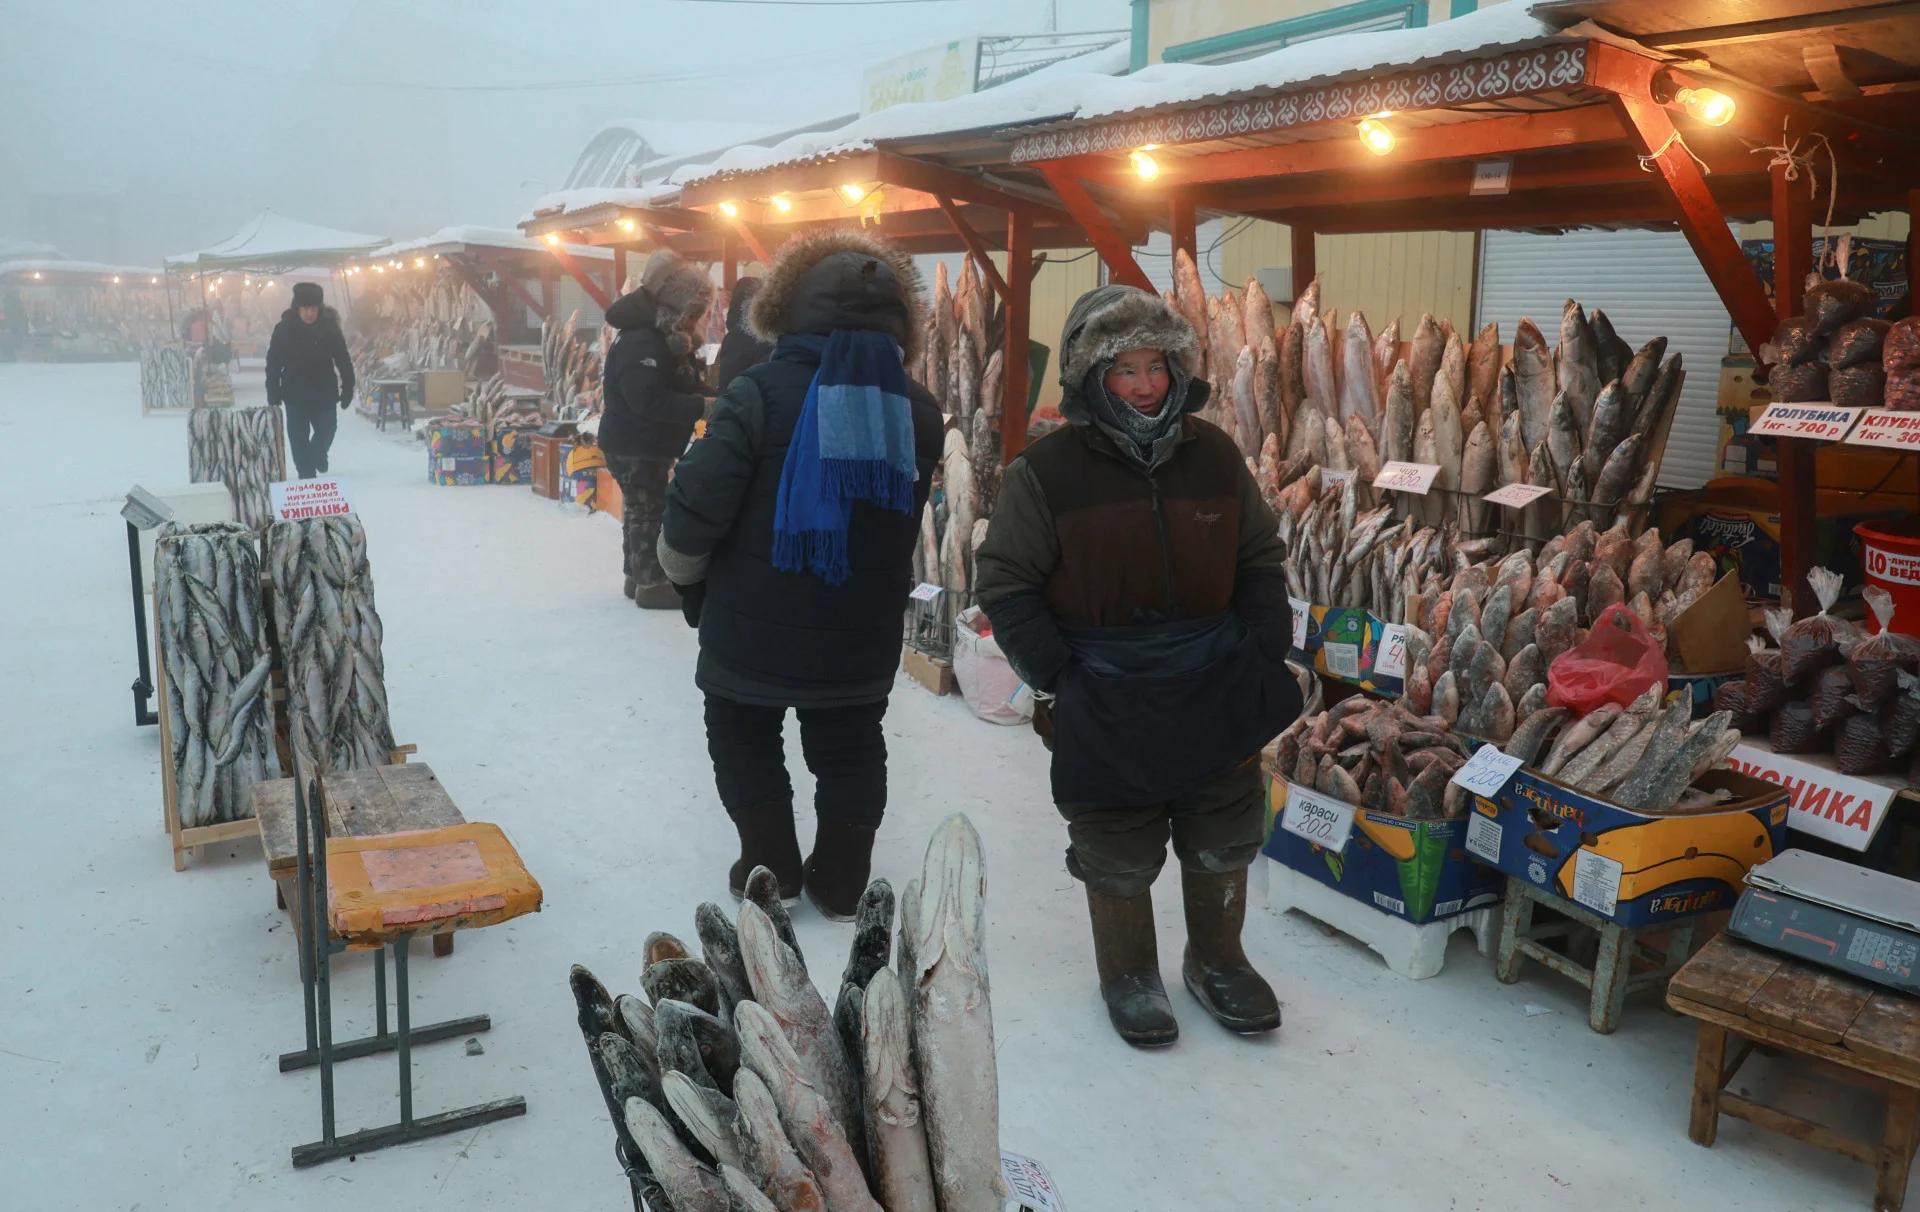 Reuters: Vendor Yegor Dyachkovsky stands next to deep-frozen fish at an open-air market on a frosty day in Yakutsk, Russia, December 5, 2023. Temperatures in parts of the Sakha Republic, also known as Yakutia and located in the northeastern part of Siberia, went below minus 50 degrees Celsius (minus 58 degrees Fahrenheit) on December 5. REUTERS/Roman Kutukov